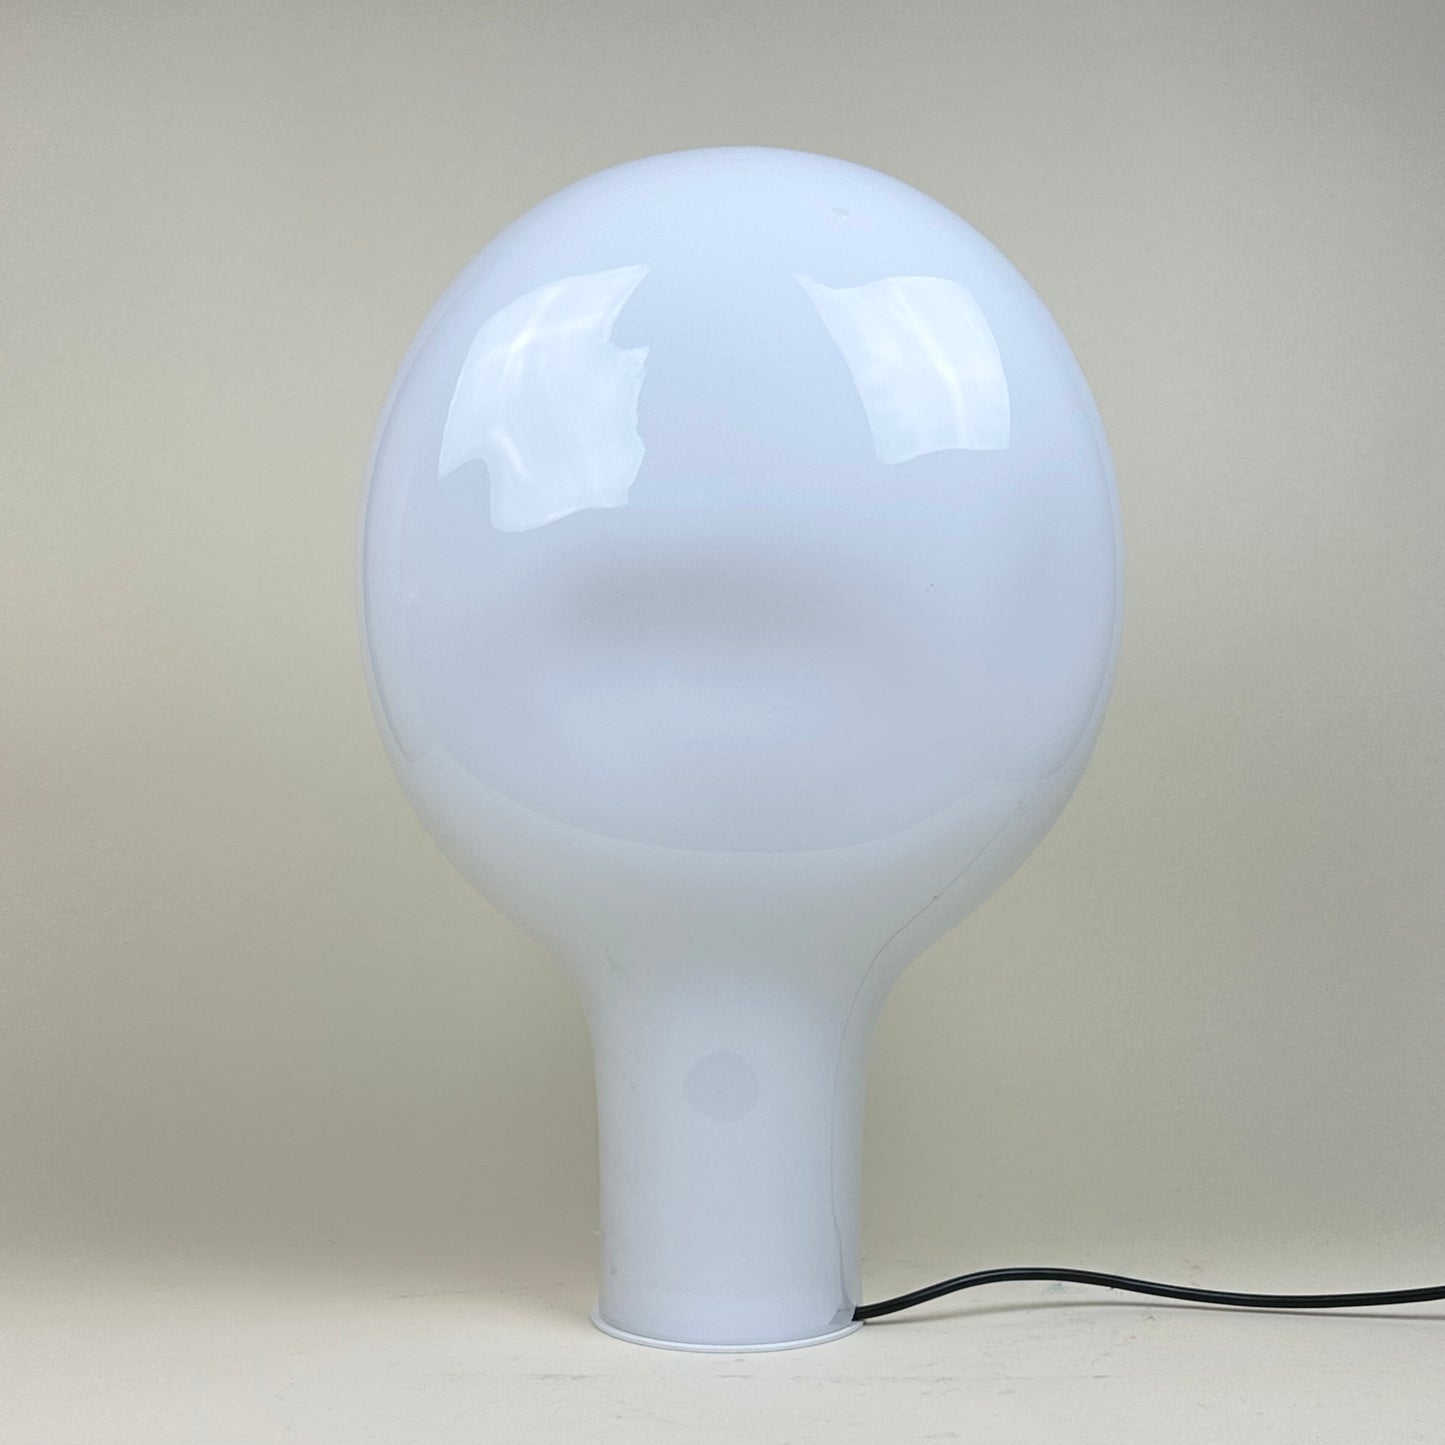 NM lamp by Simon Klenell